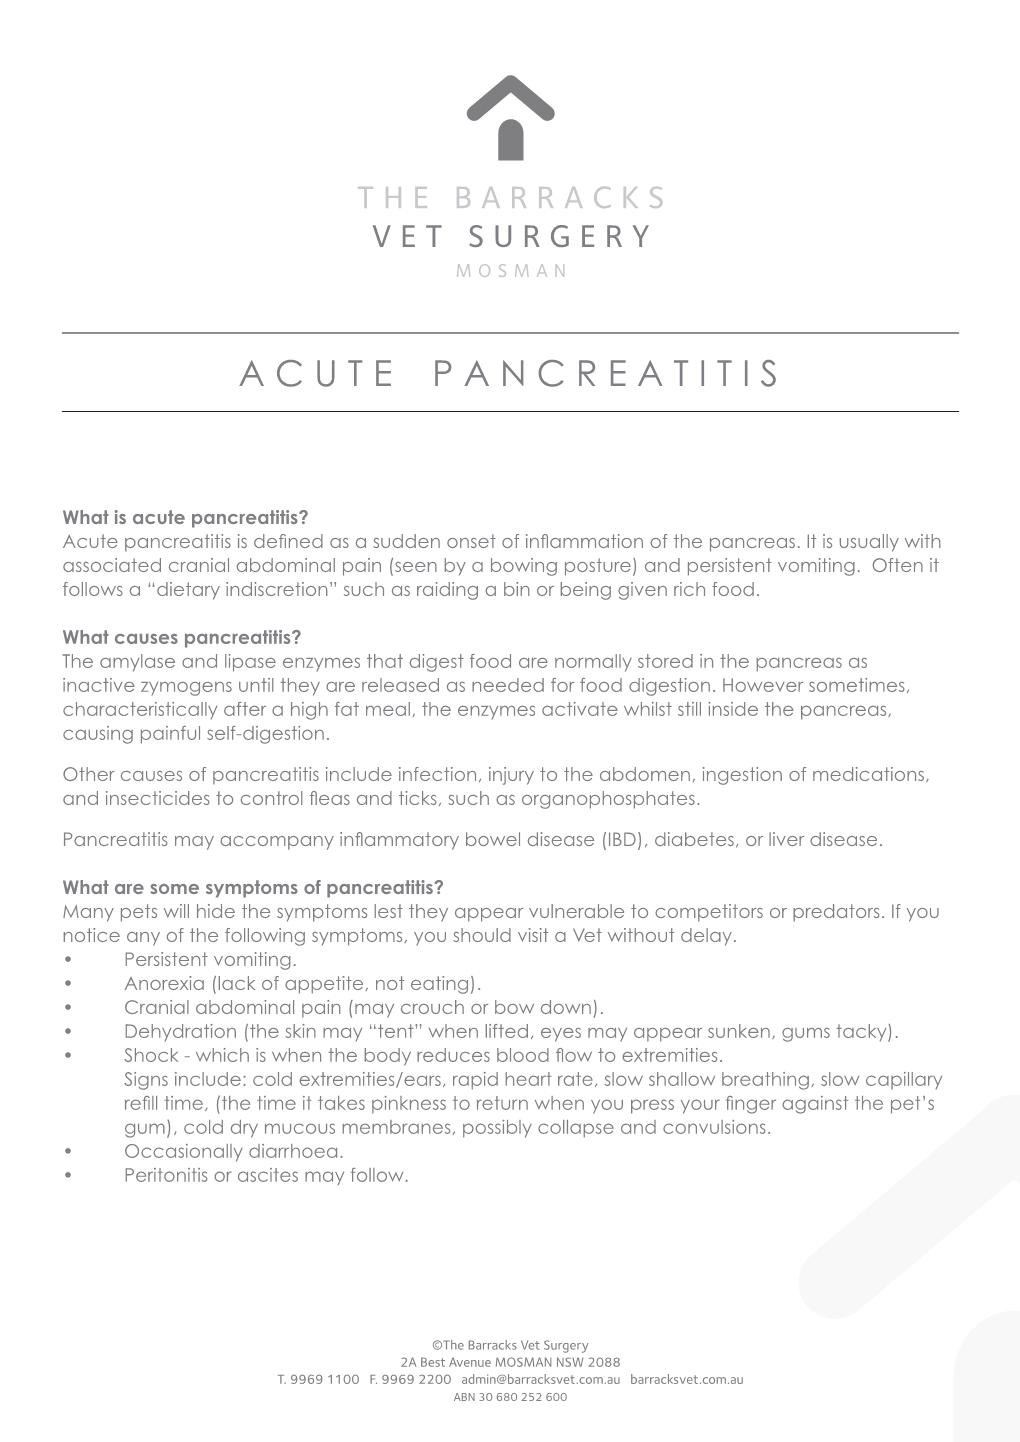 Pancreatitis? Acute Pancreatitis Is Defined As a Sudden Onset of Inflammation of the Pancreas